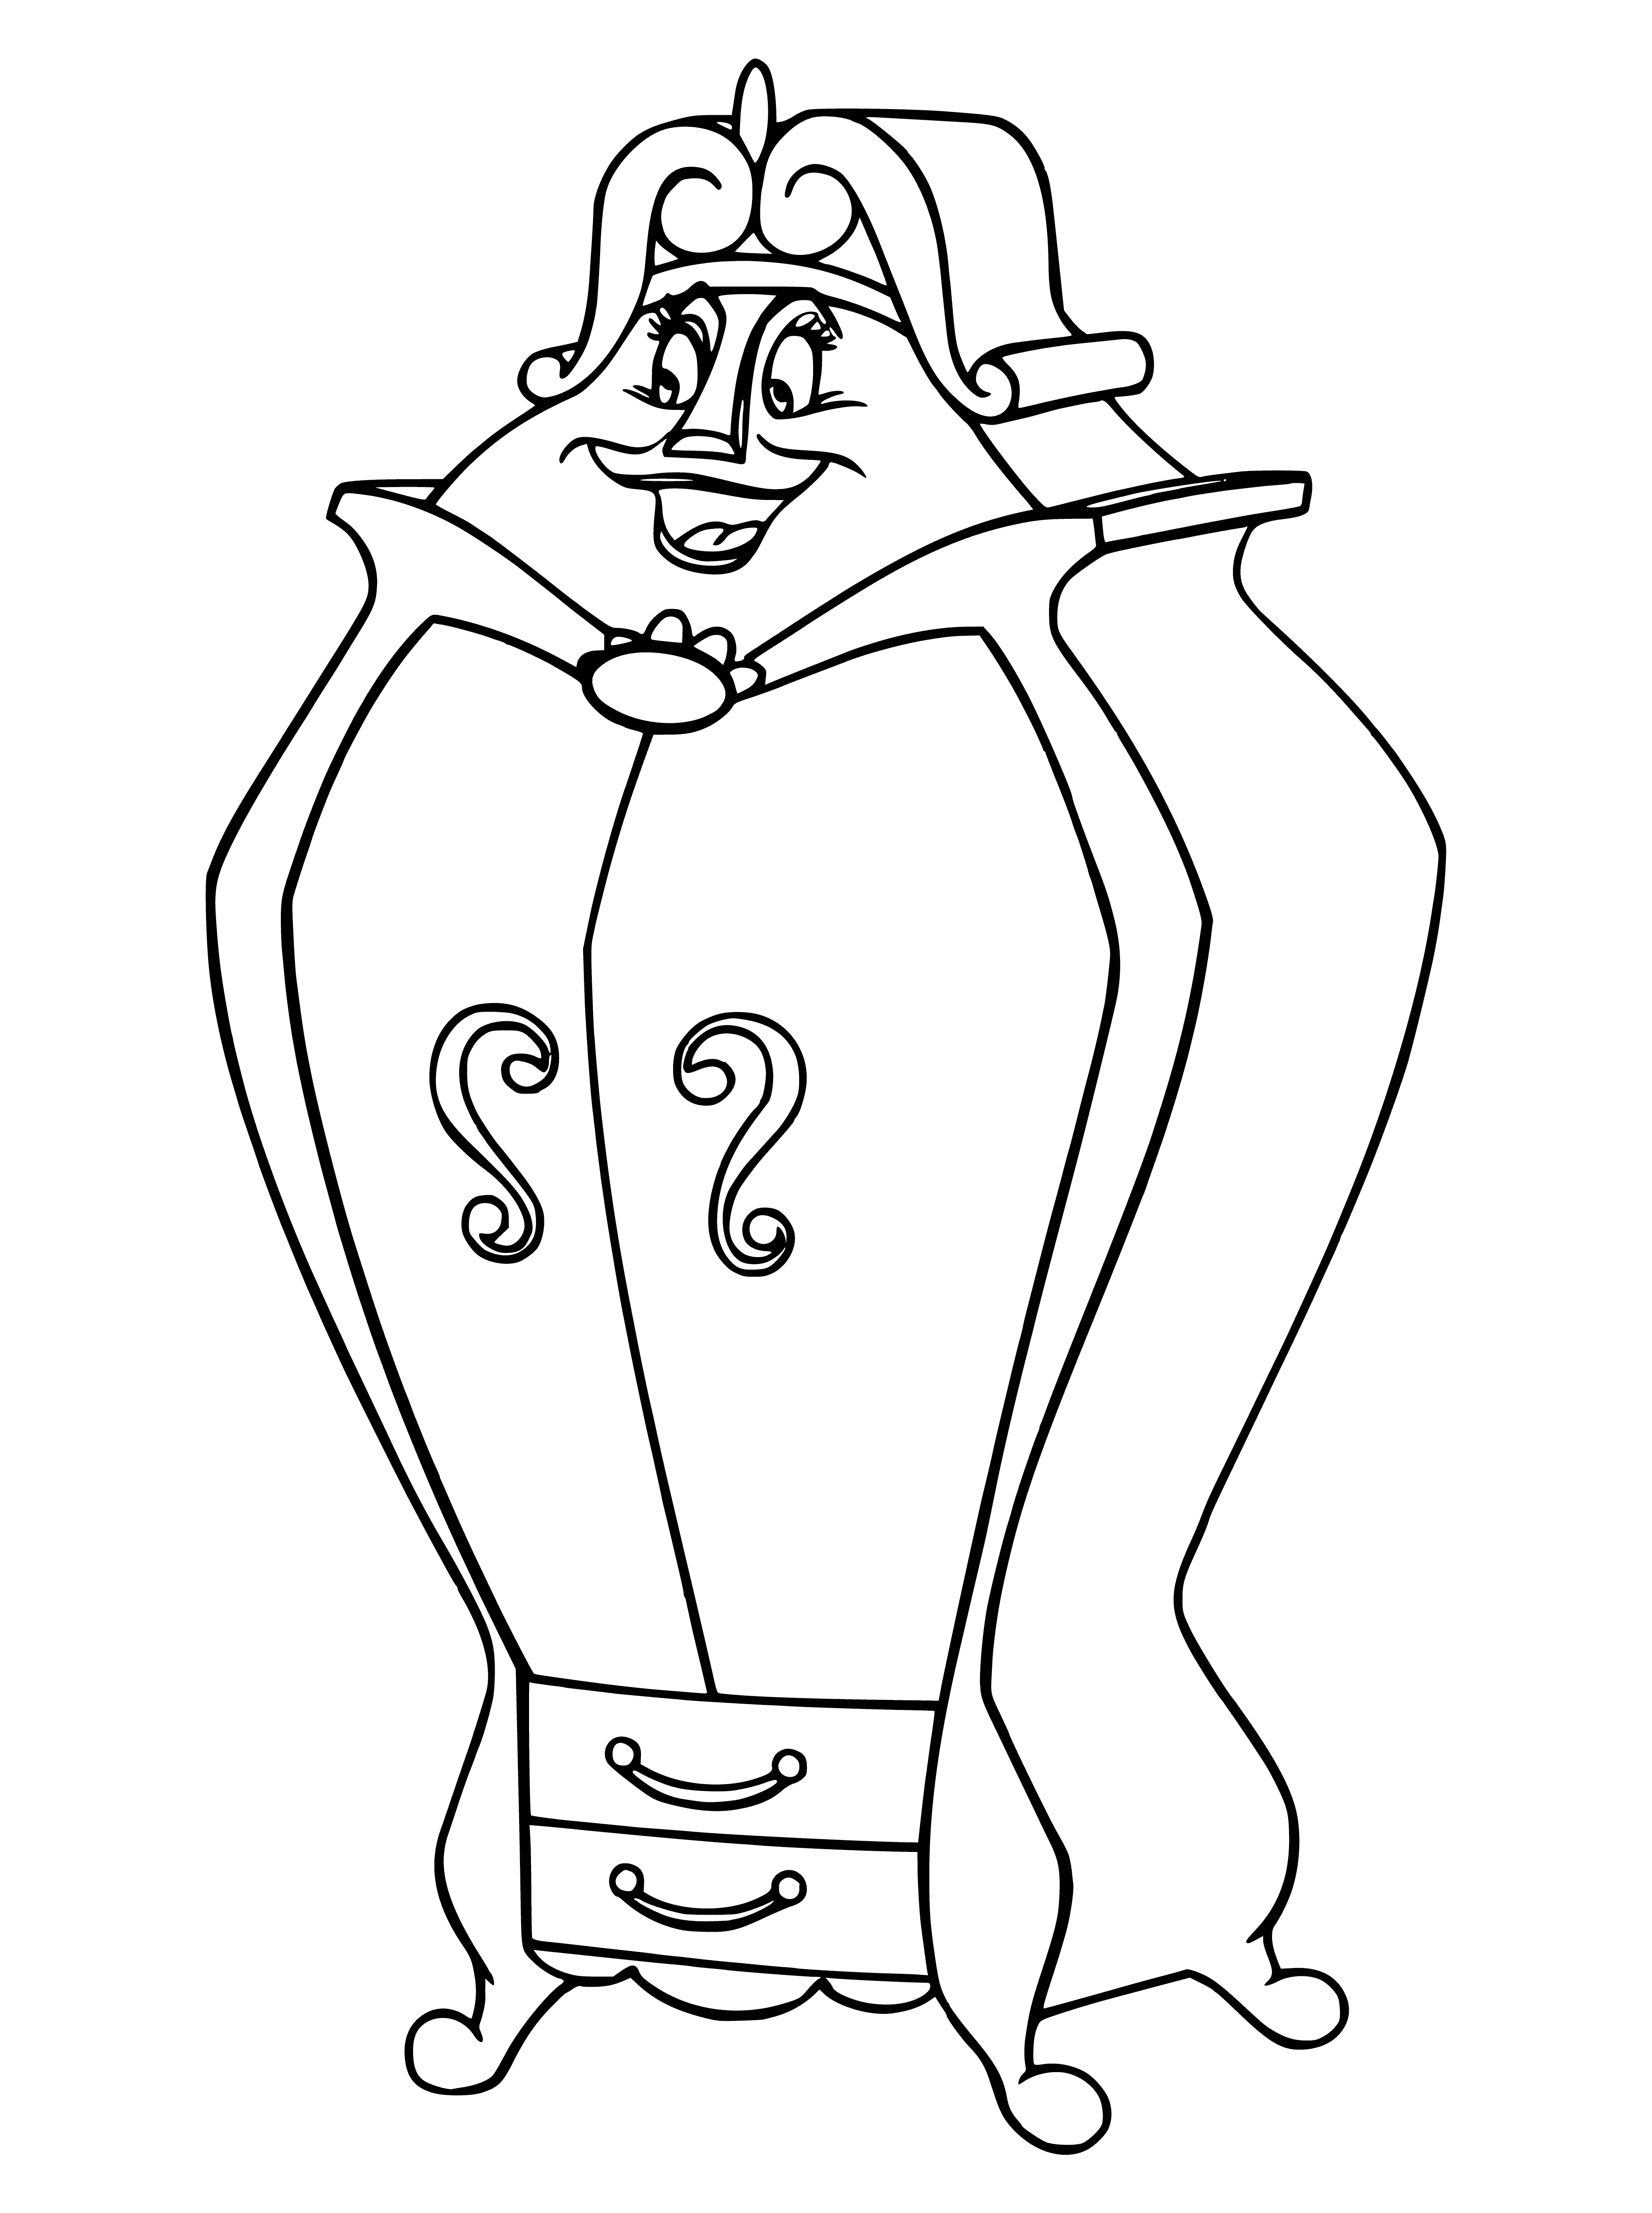 coloring page: Beauty looks sadly at the Beast, large and furry with a long tail, lying on the ground with his head in his paw and a silent roar on his lips.